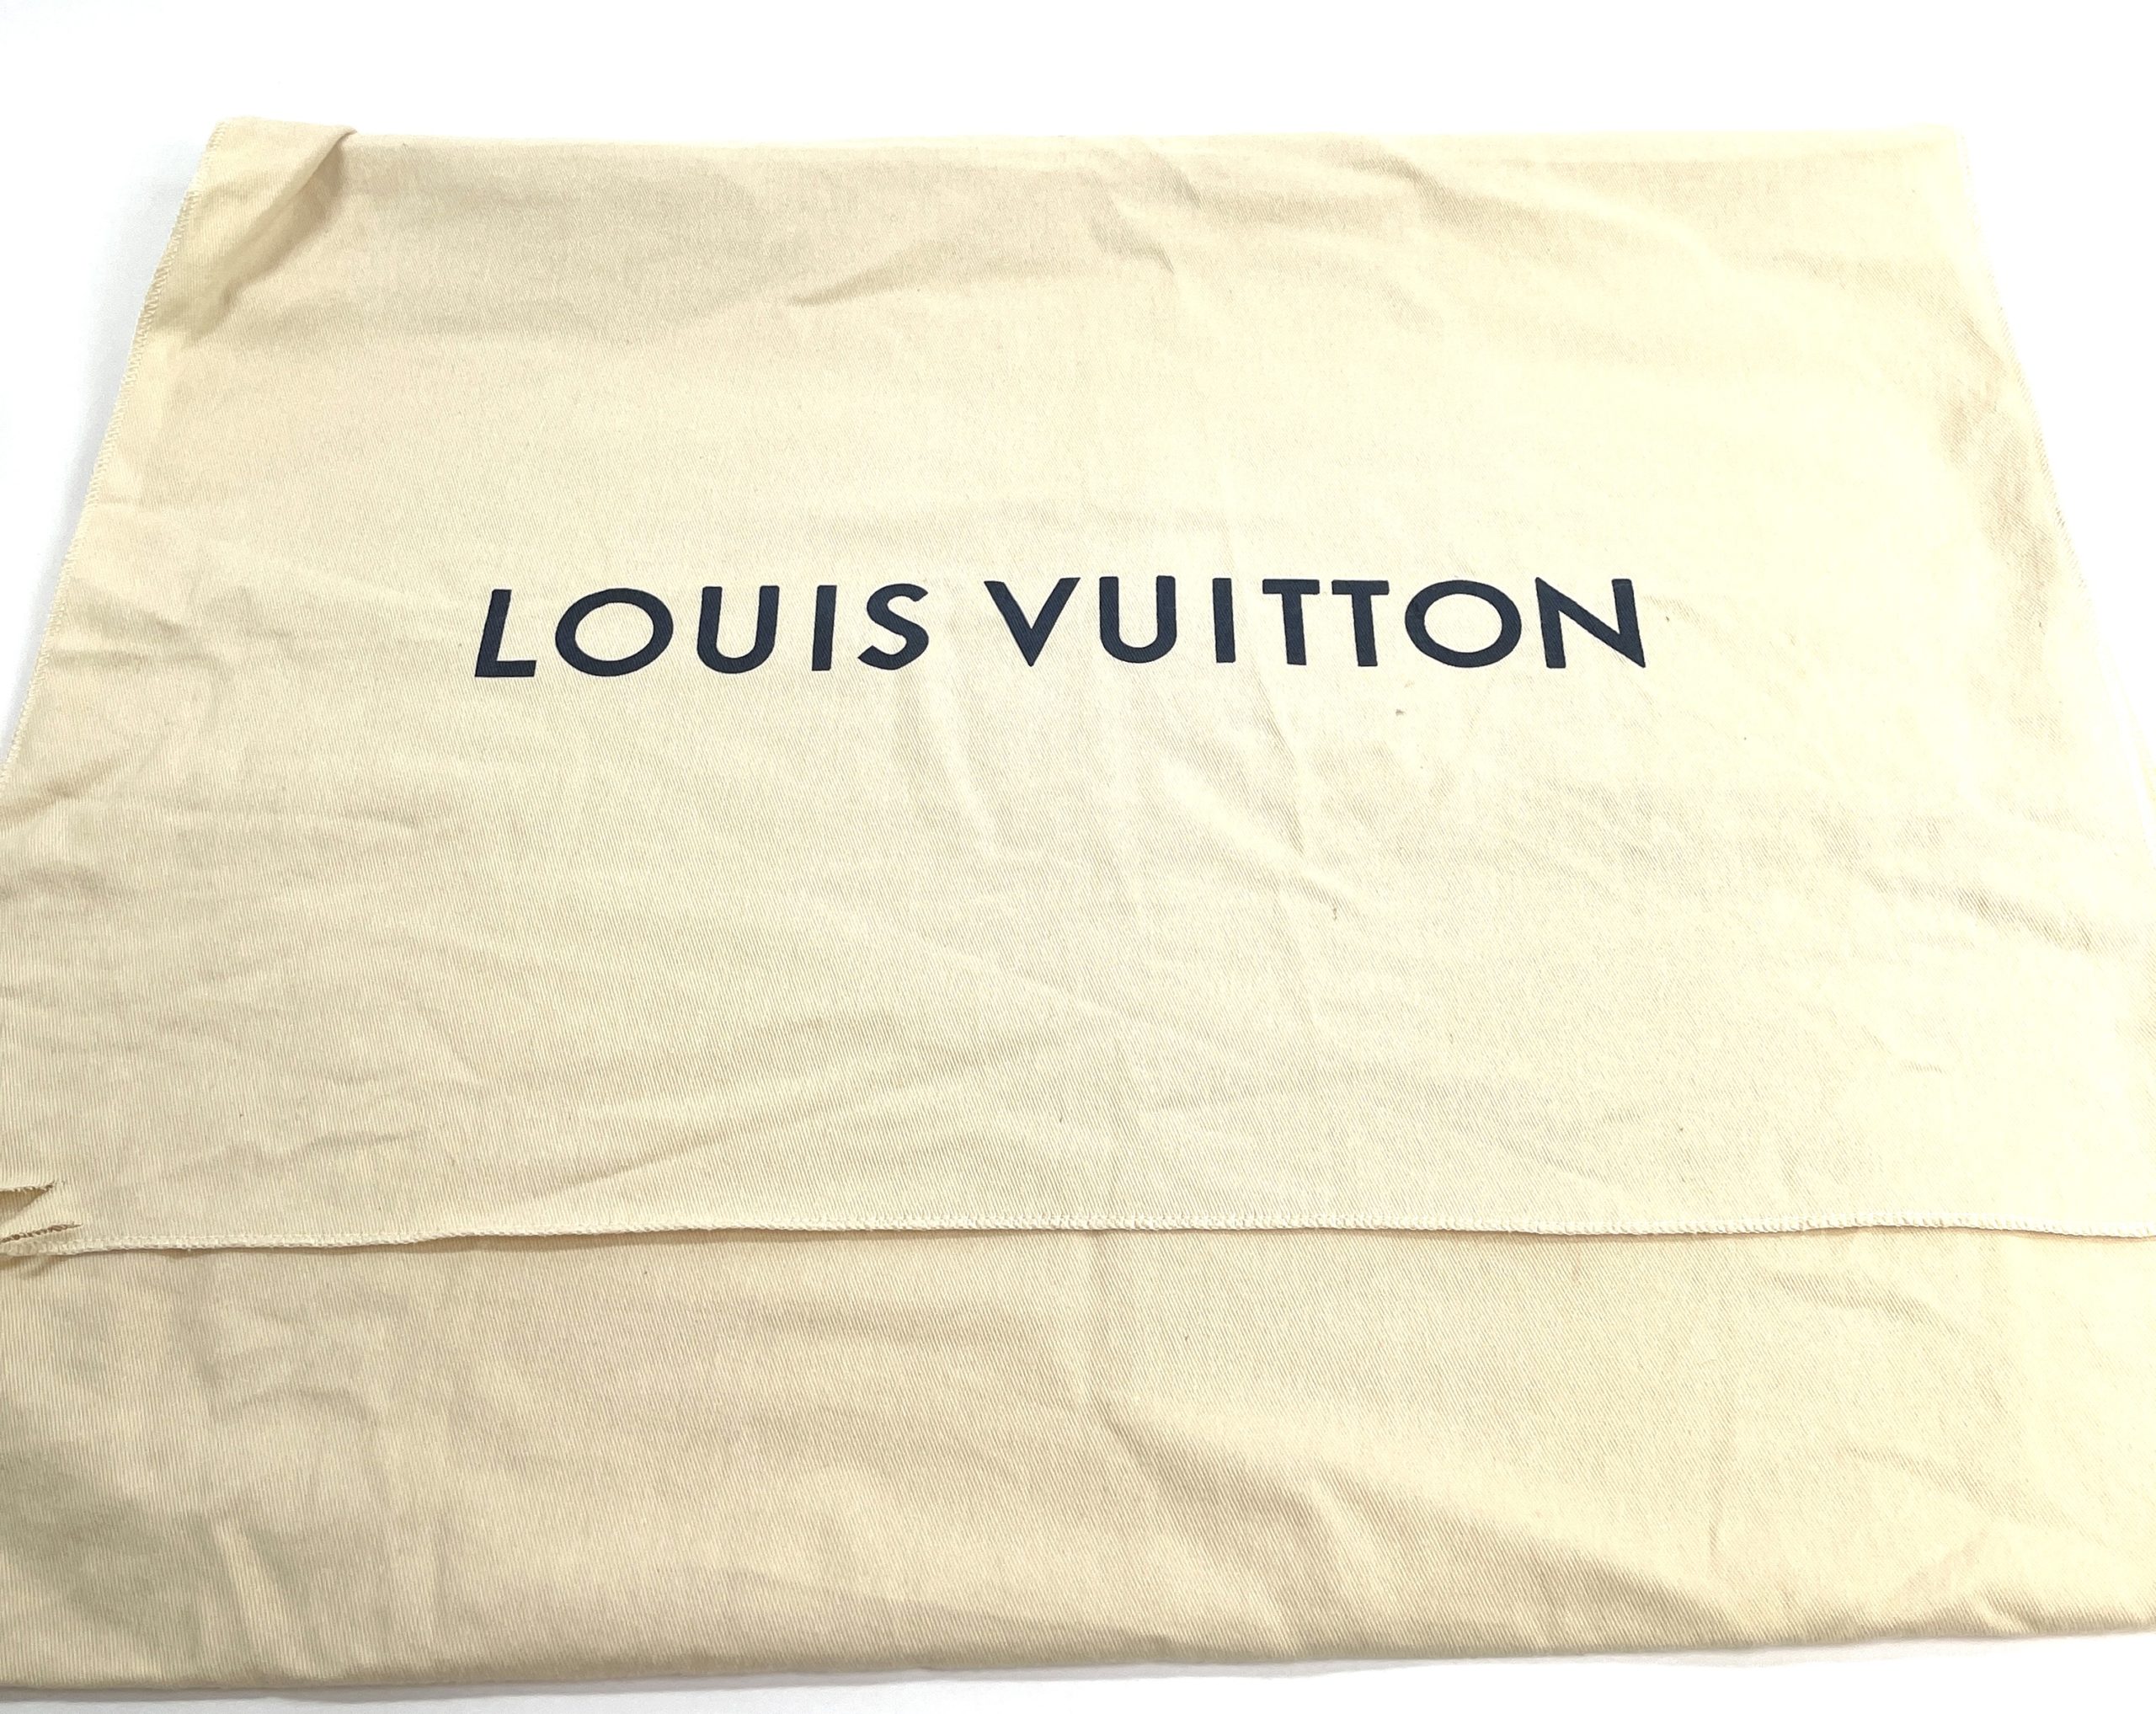 Louis Vuitton Watercolor - 35 For Sale on 1stDibs  watercolor lv, louis  vuitton aquarelle watercolor, louis vuitton watercolor paint